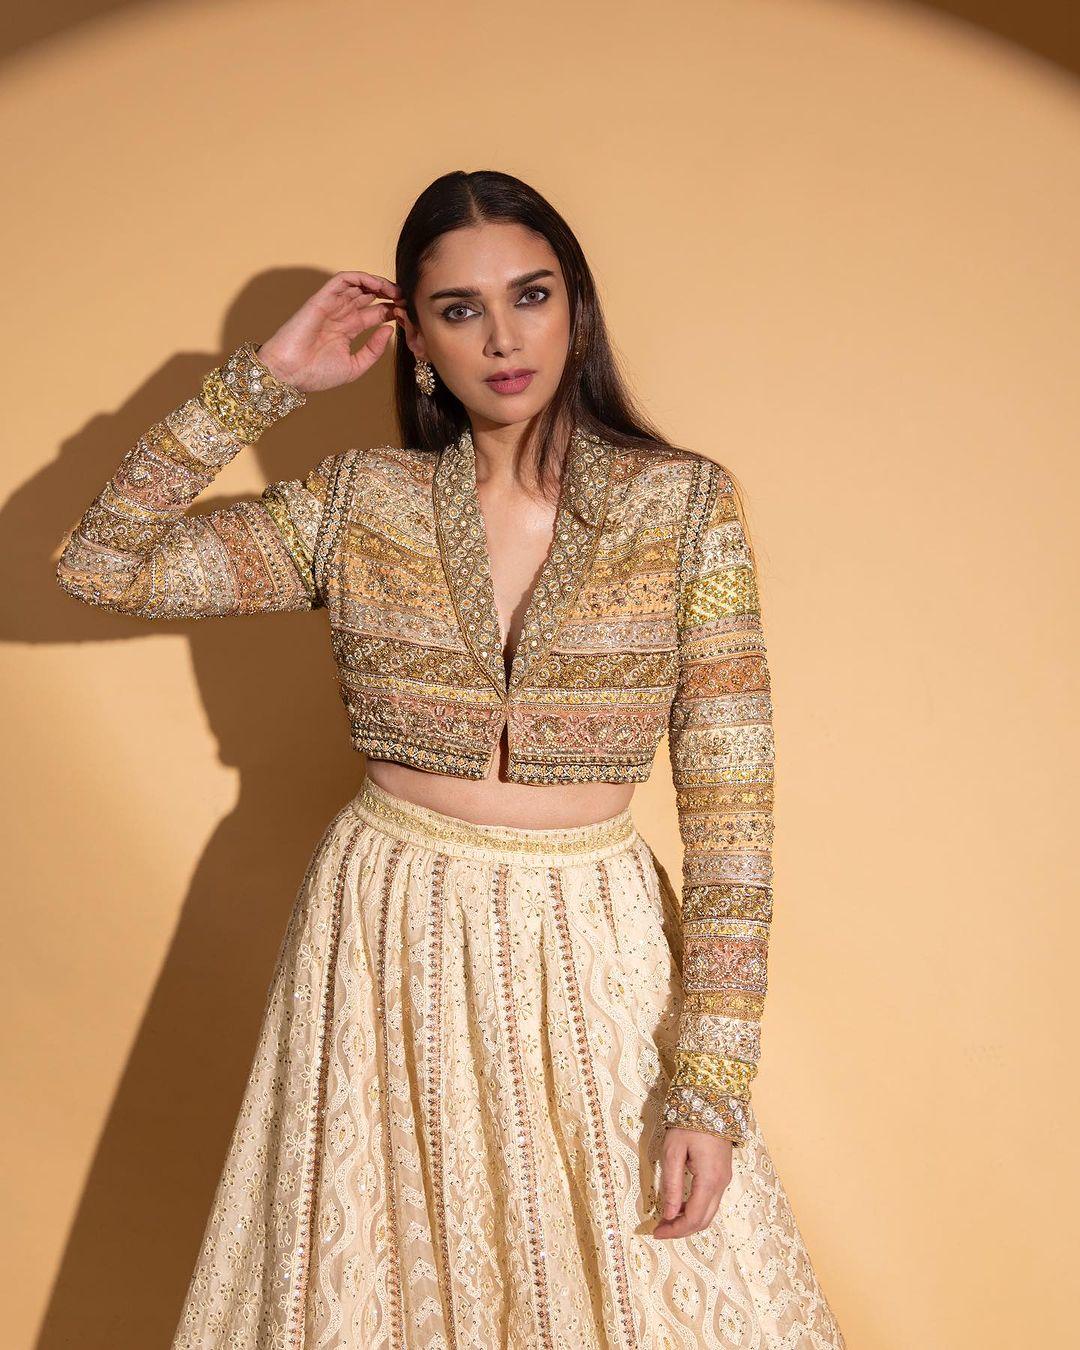 Aditi’s crop top has ethnic embroidery on it but the top's blazer style added a touch of modernity and glam